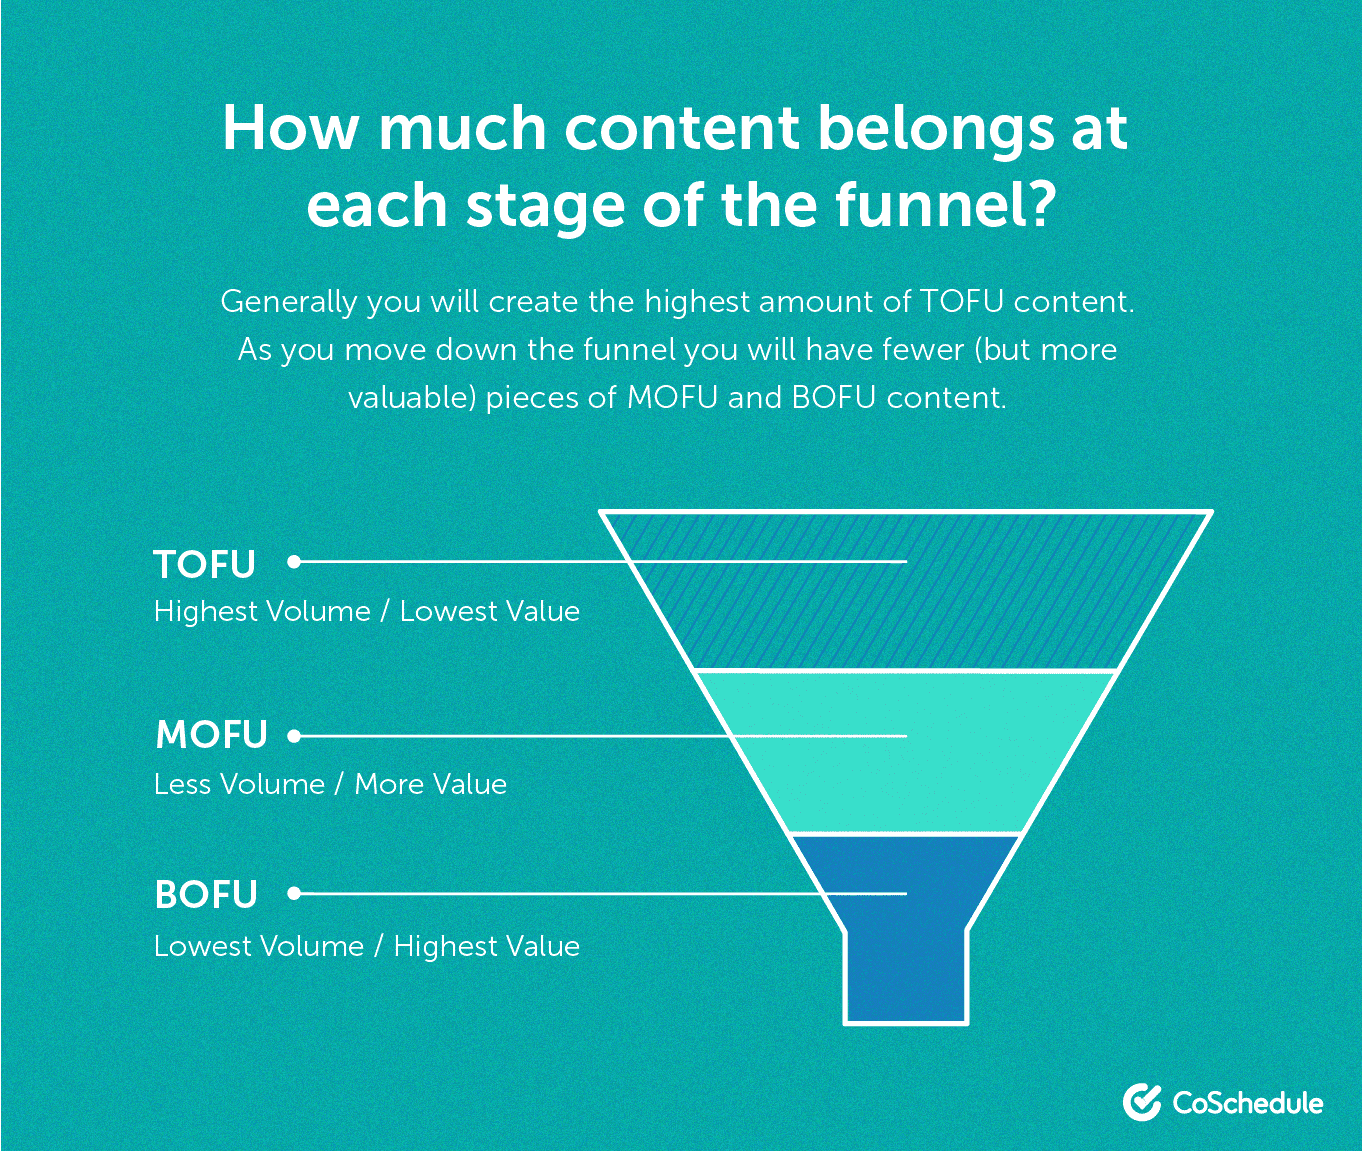 How much content belongs in each stage of the funnel?